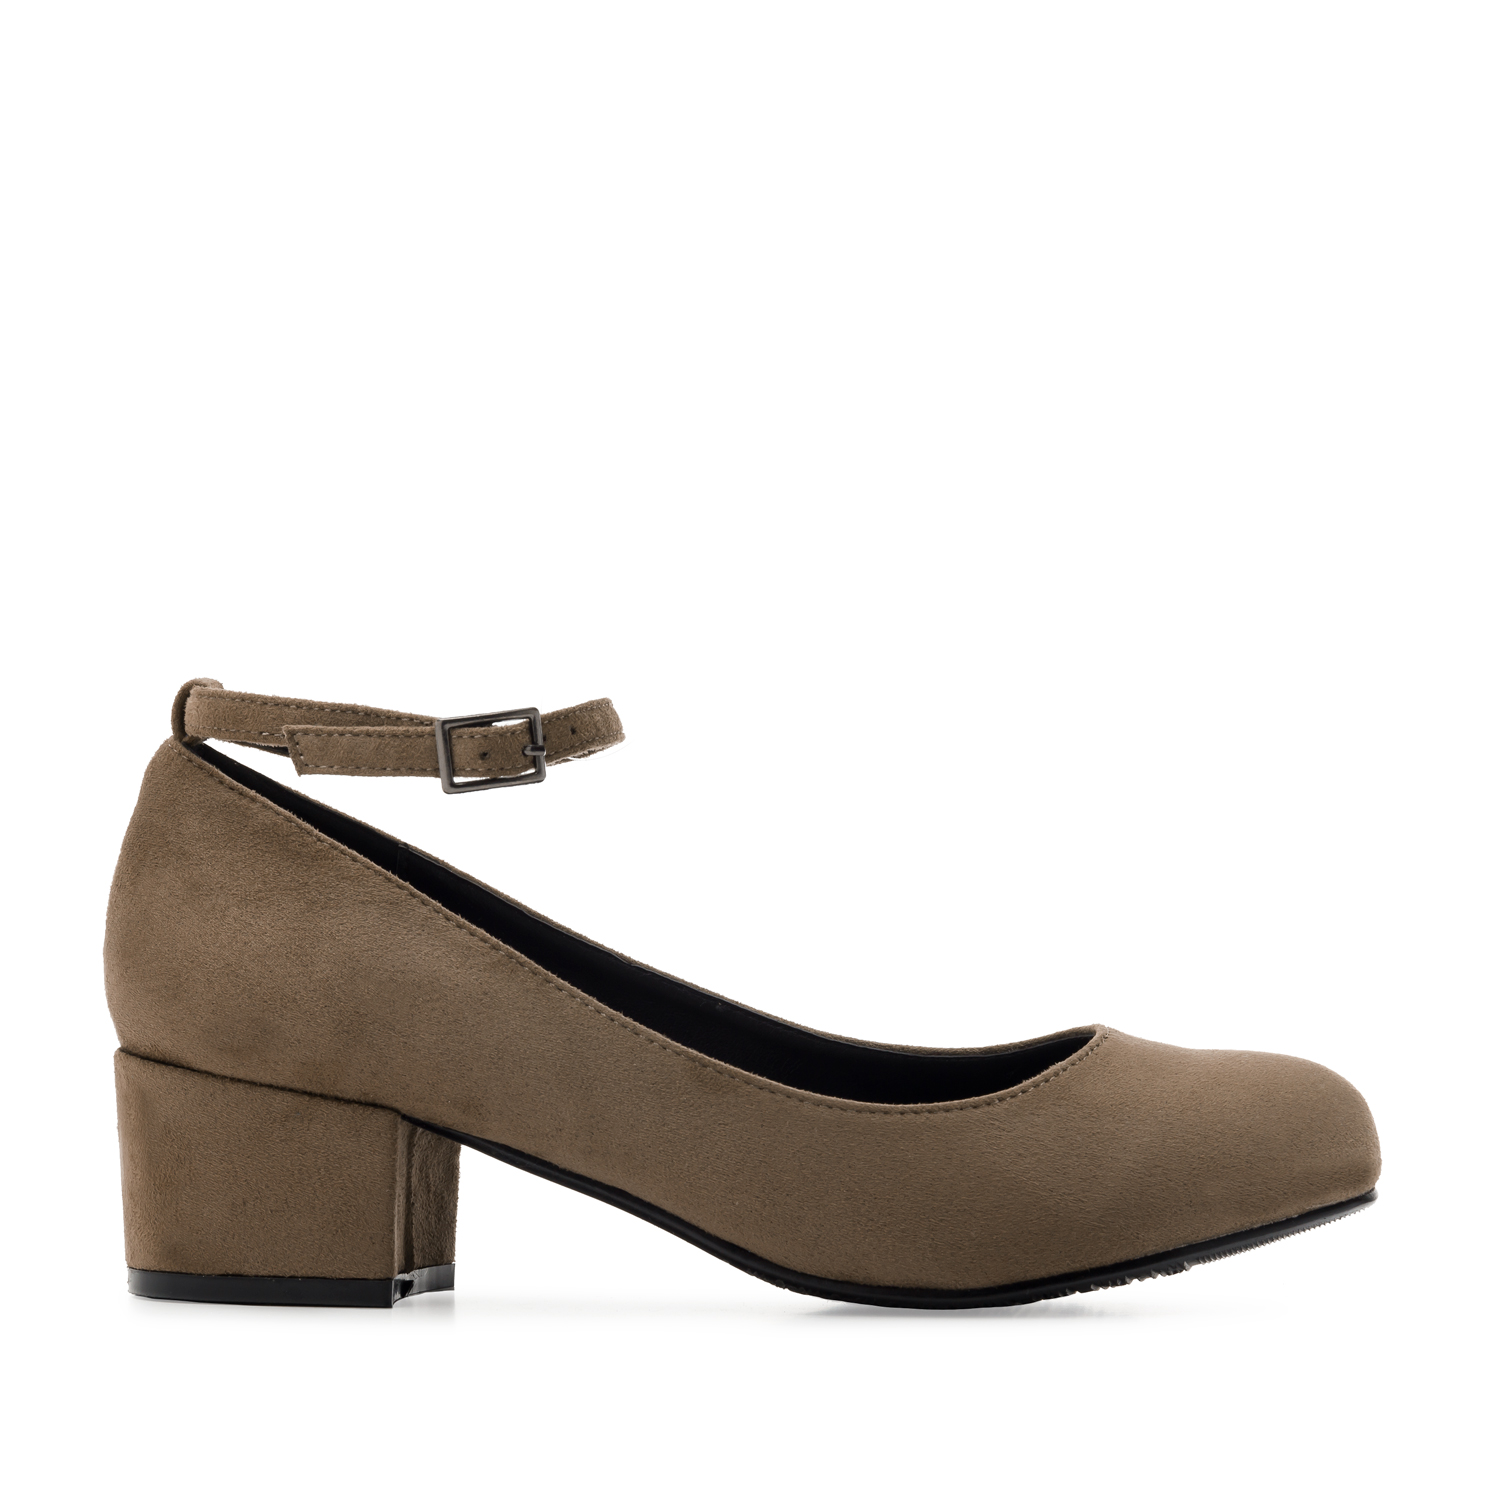 Ankle-Tie Shoes in Earth-coloured Suede 